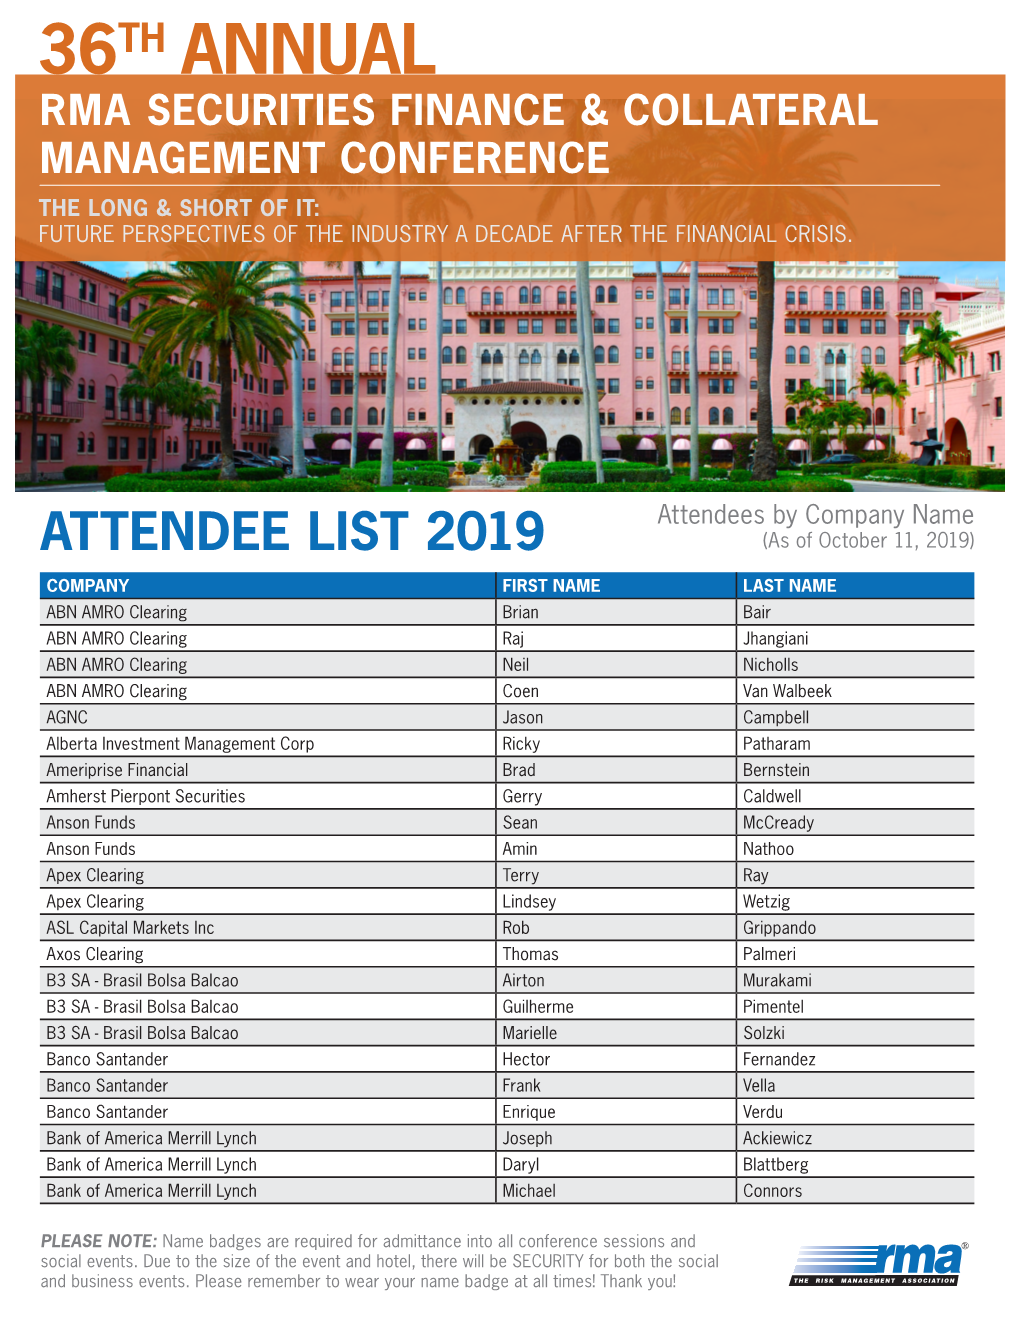 ATTENDEE LIST 2019 (As of October 11, 2019)